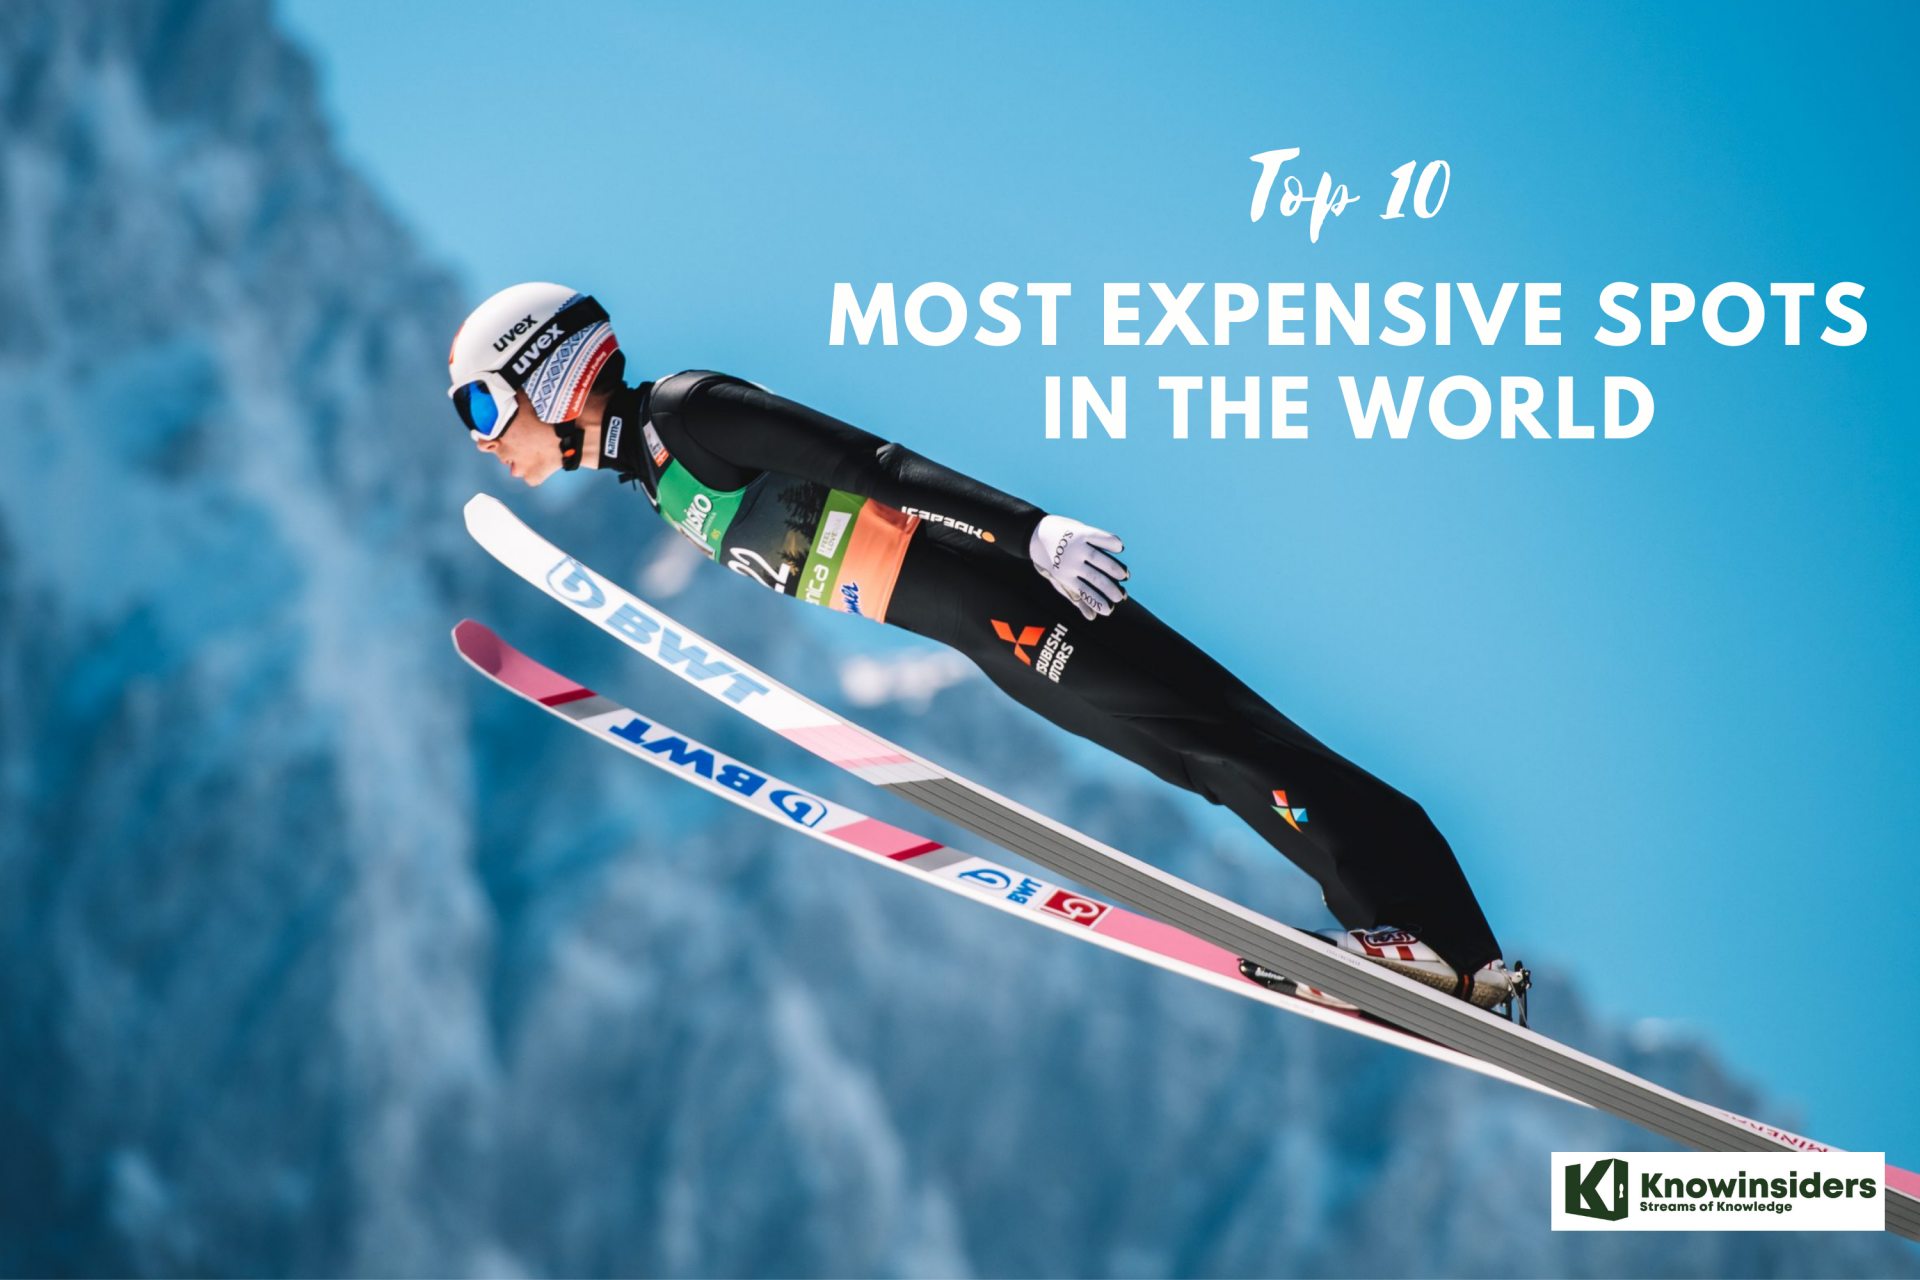 Top 10 Most Expensive Sports in the World